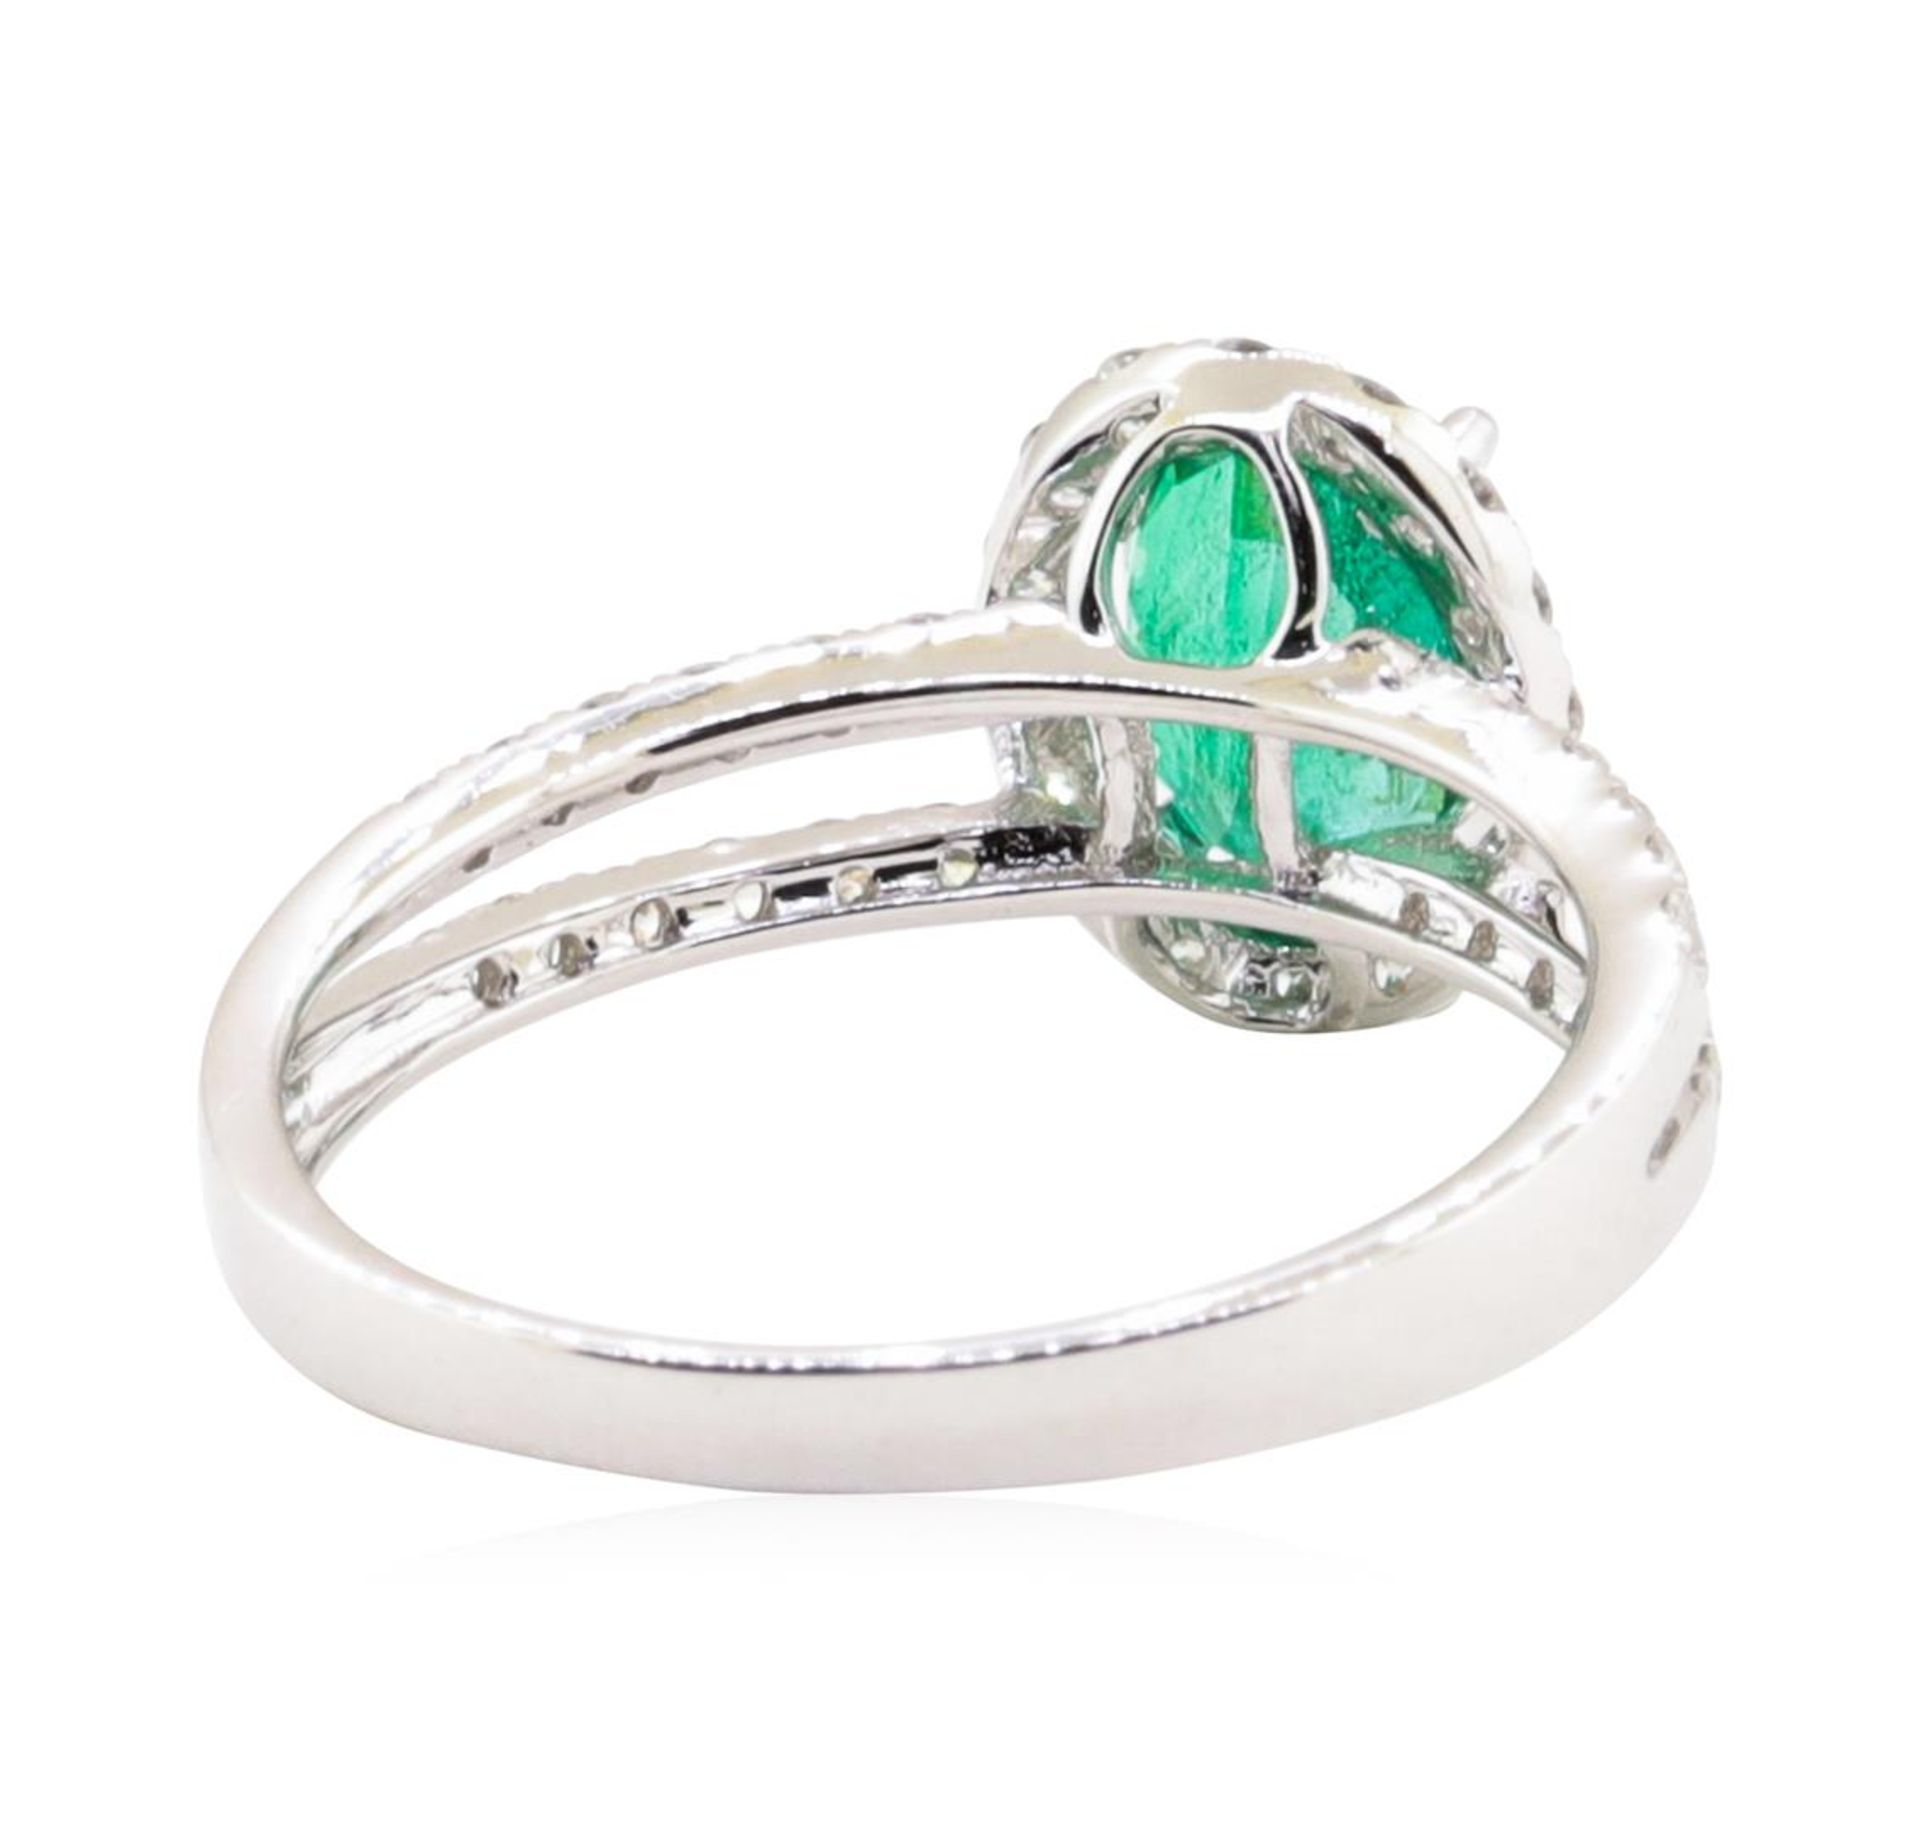 1.21 ctw Emerald and Diamond Ring - 18KT White Gold - Image 3 of 5